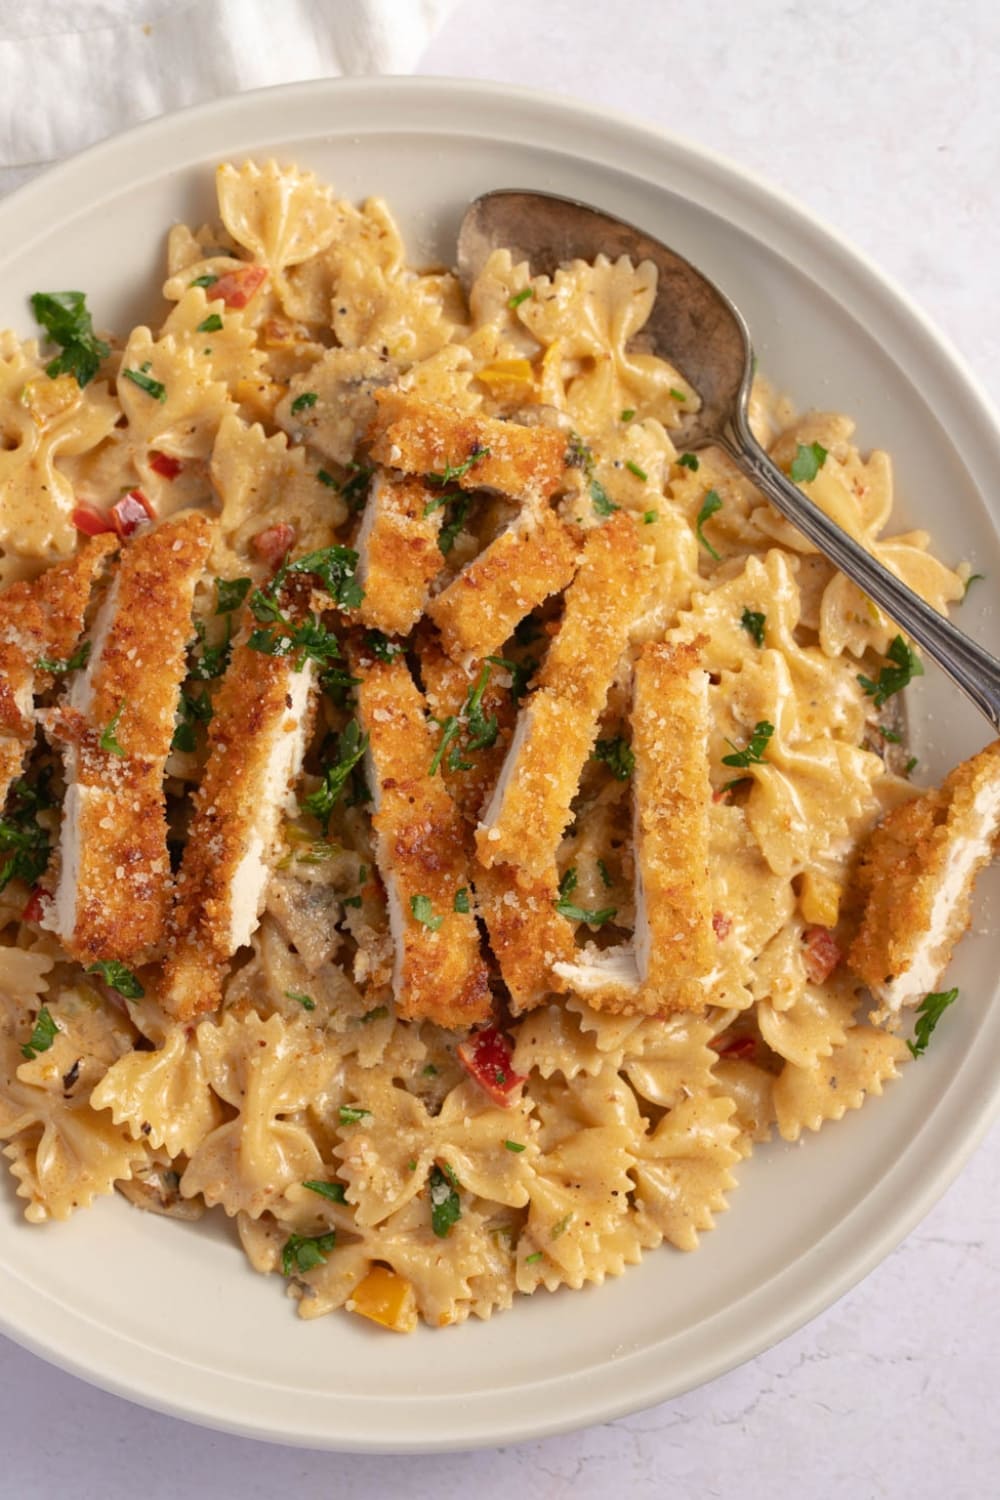 Delicious Homemade Chicken Pasta with Herbs